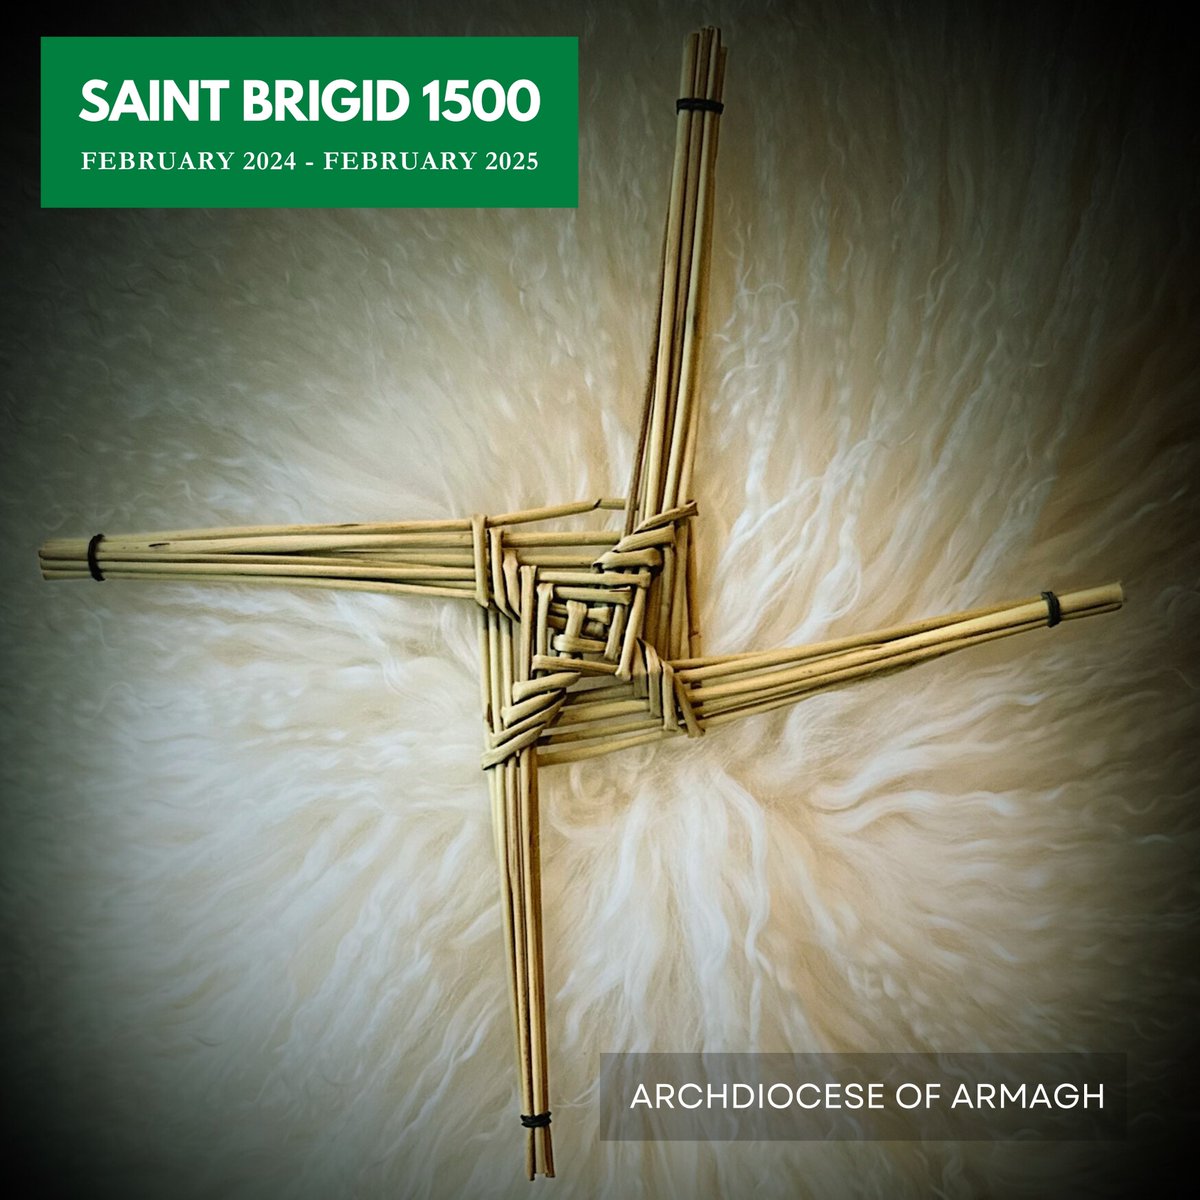 Archdiocese of Armagh to celebrate life and legacy of Saint Brigid @ArmaghParish @armaghpriest @ArmaghYouth See full statement of @ArchbishopEamon and Bishop @MichaelRouter ⬇️ catholicbishops.ie/2024/01/23/arc…